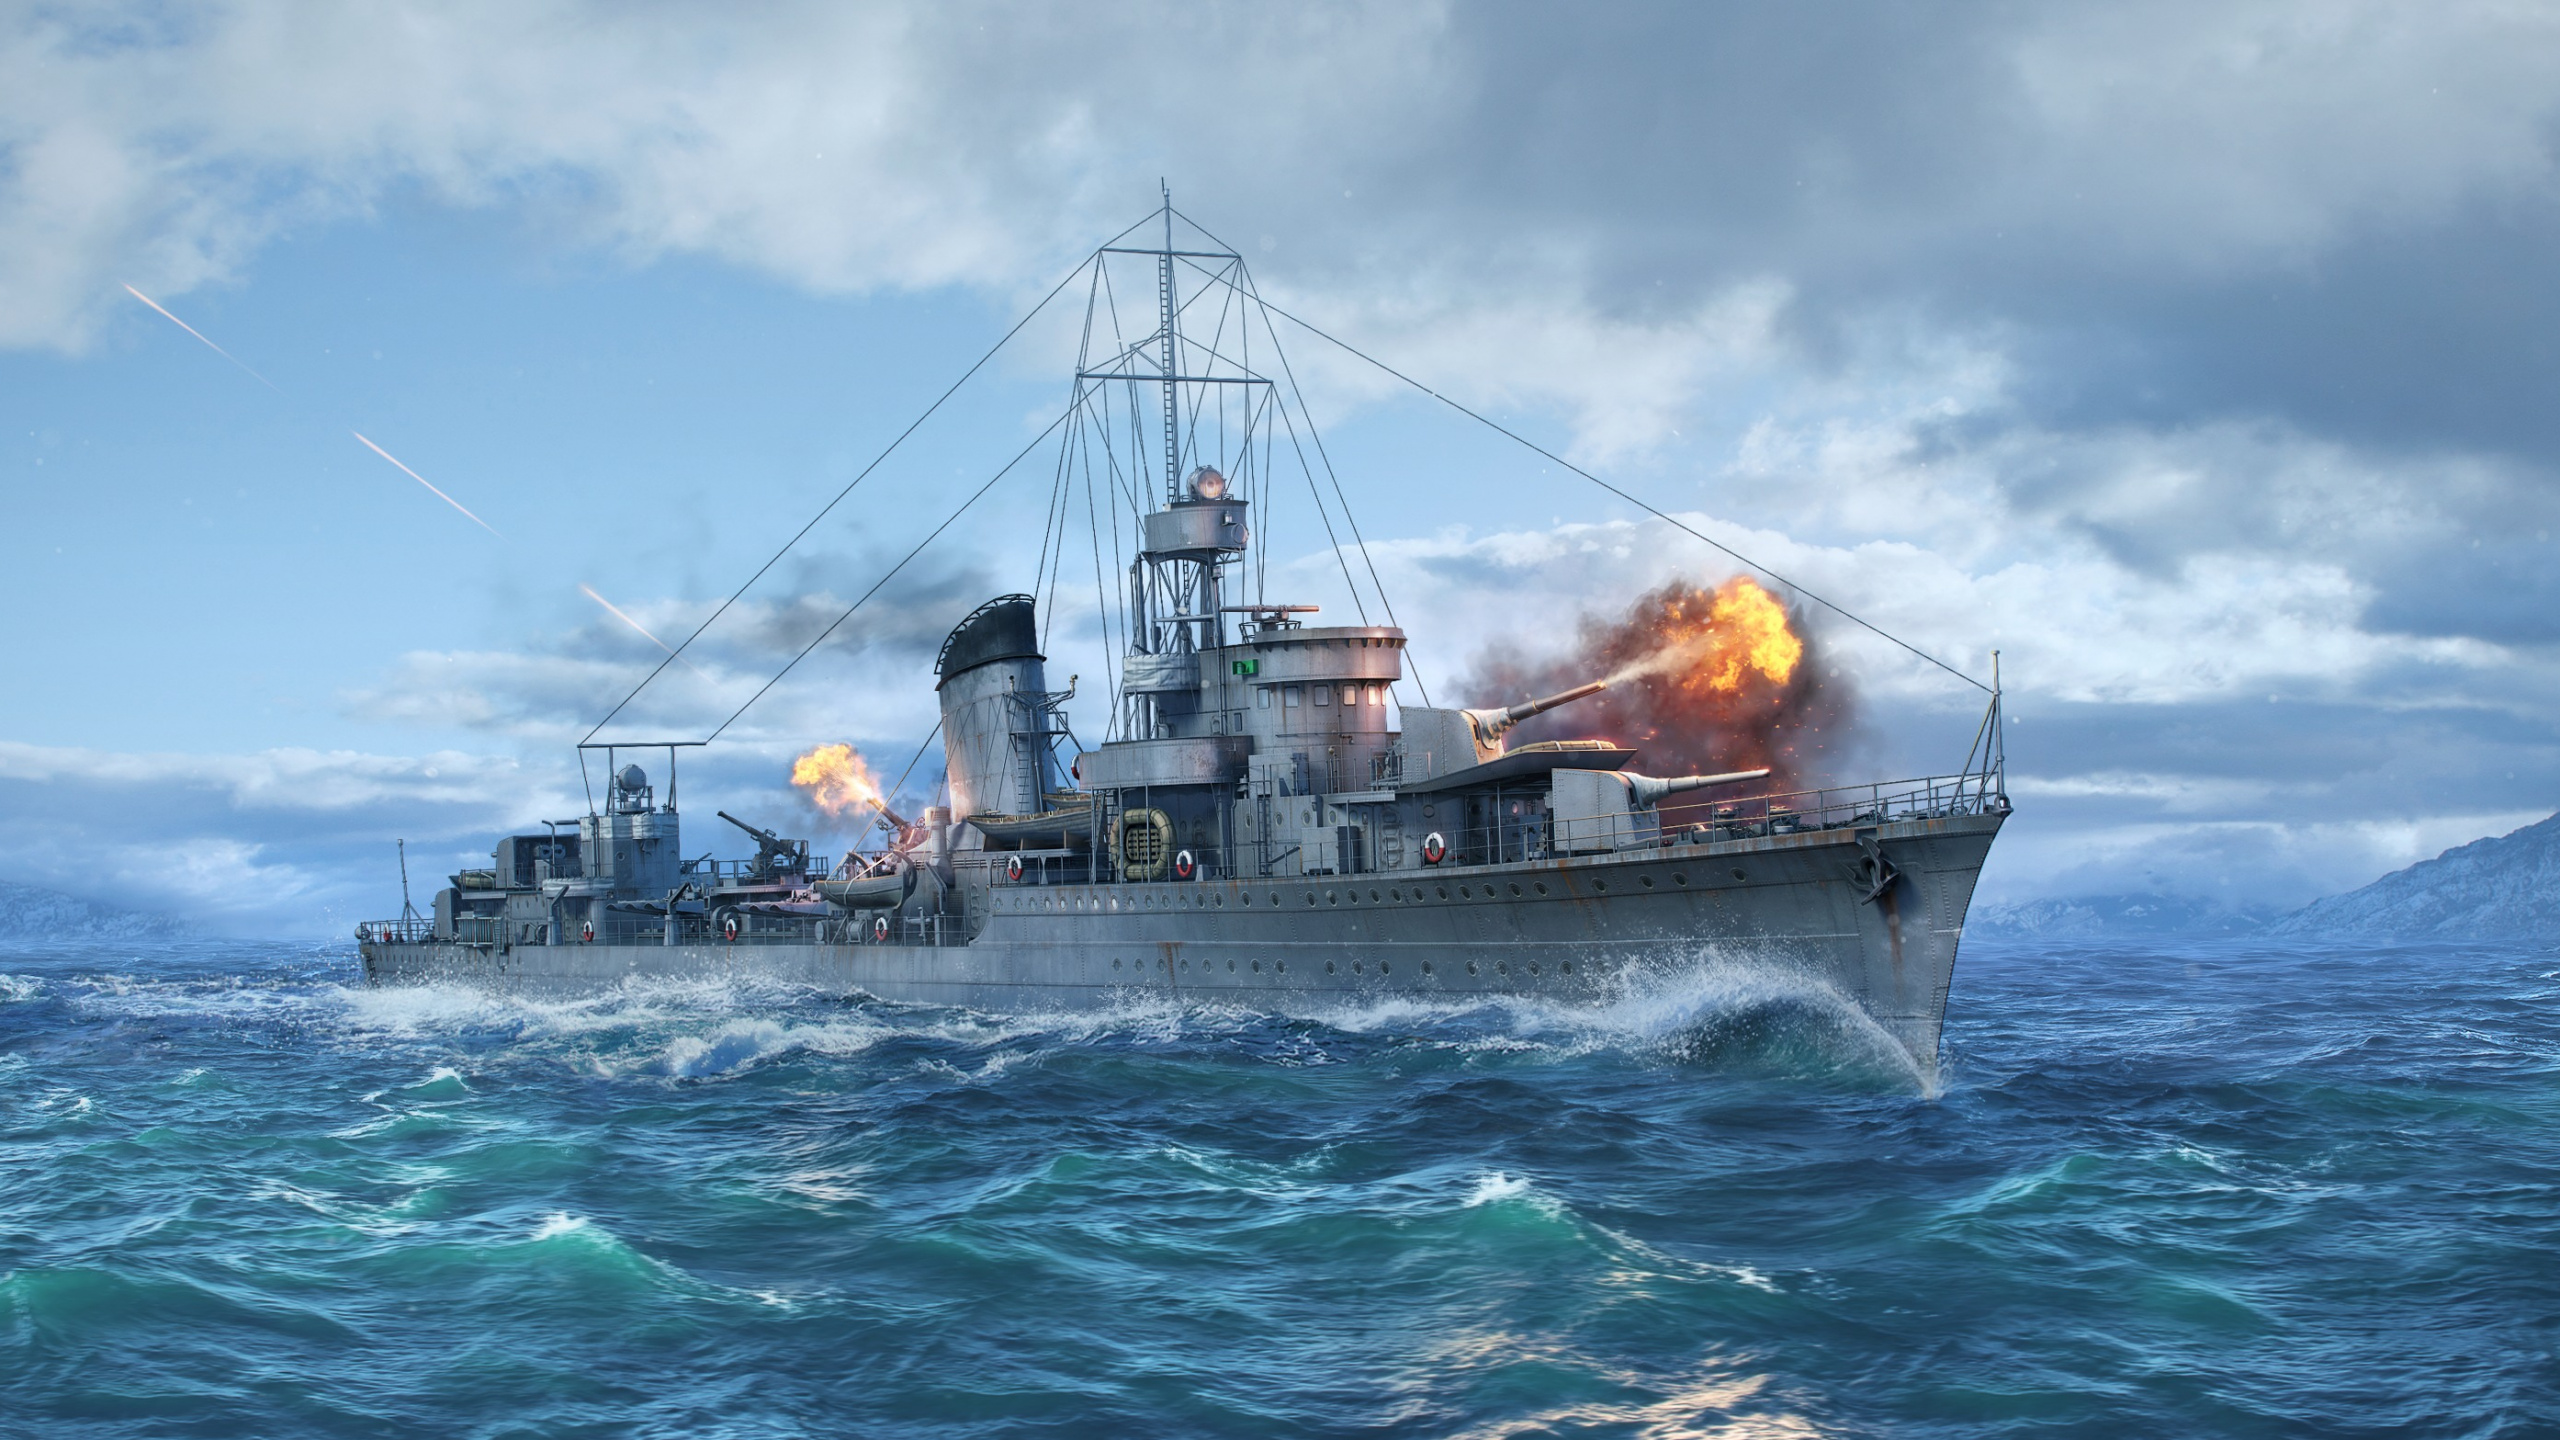 World of Warships, Destroyer, Warship, Naval Ship, Boat. Wallpaper in 2560x1440 Resolution